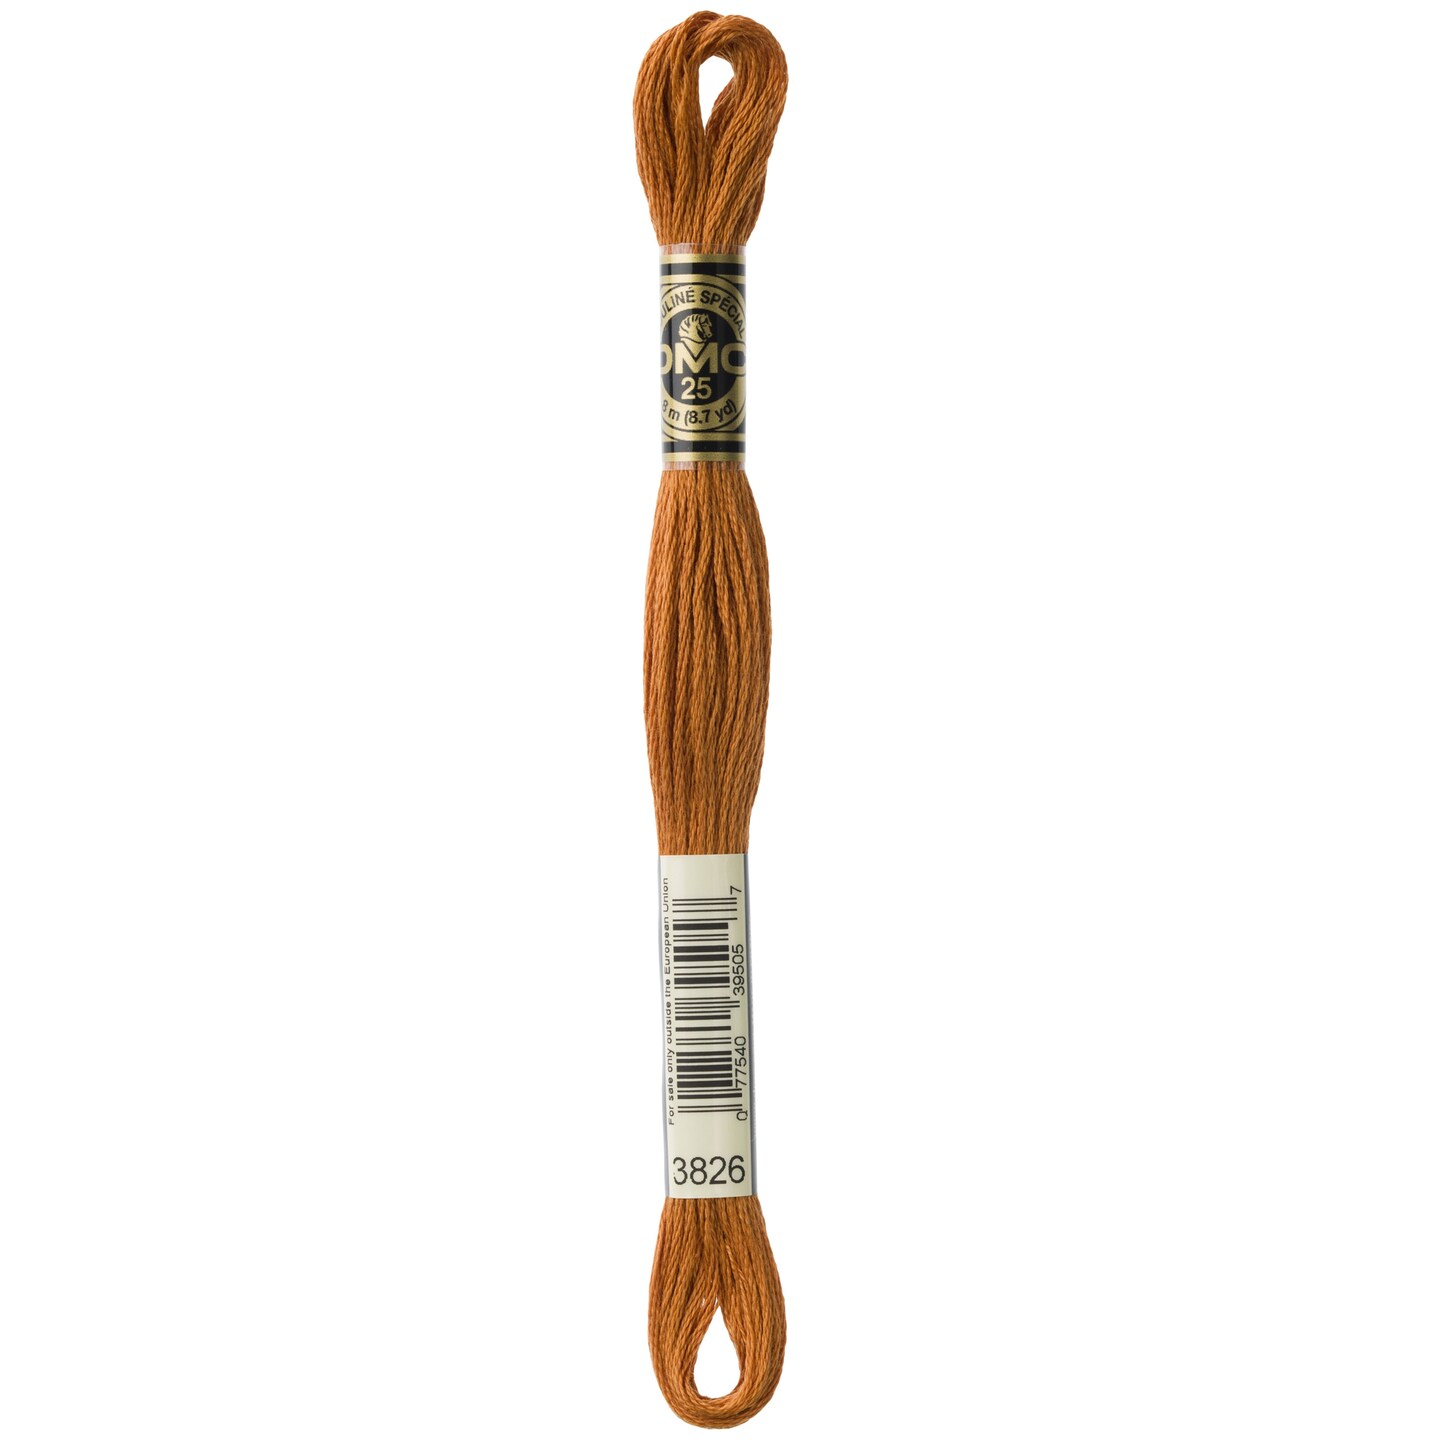 DMC 6-Strand Embroidery Cotton 8.7yd-Golden Brown